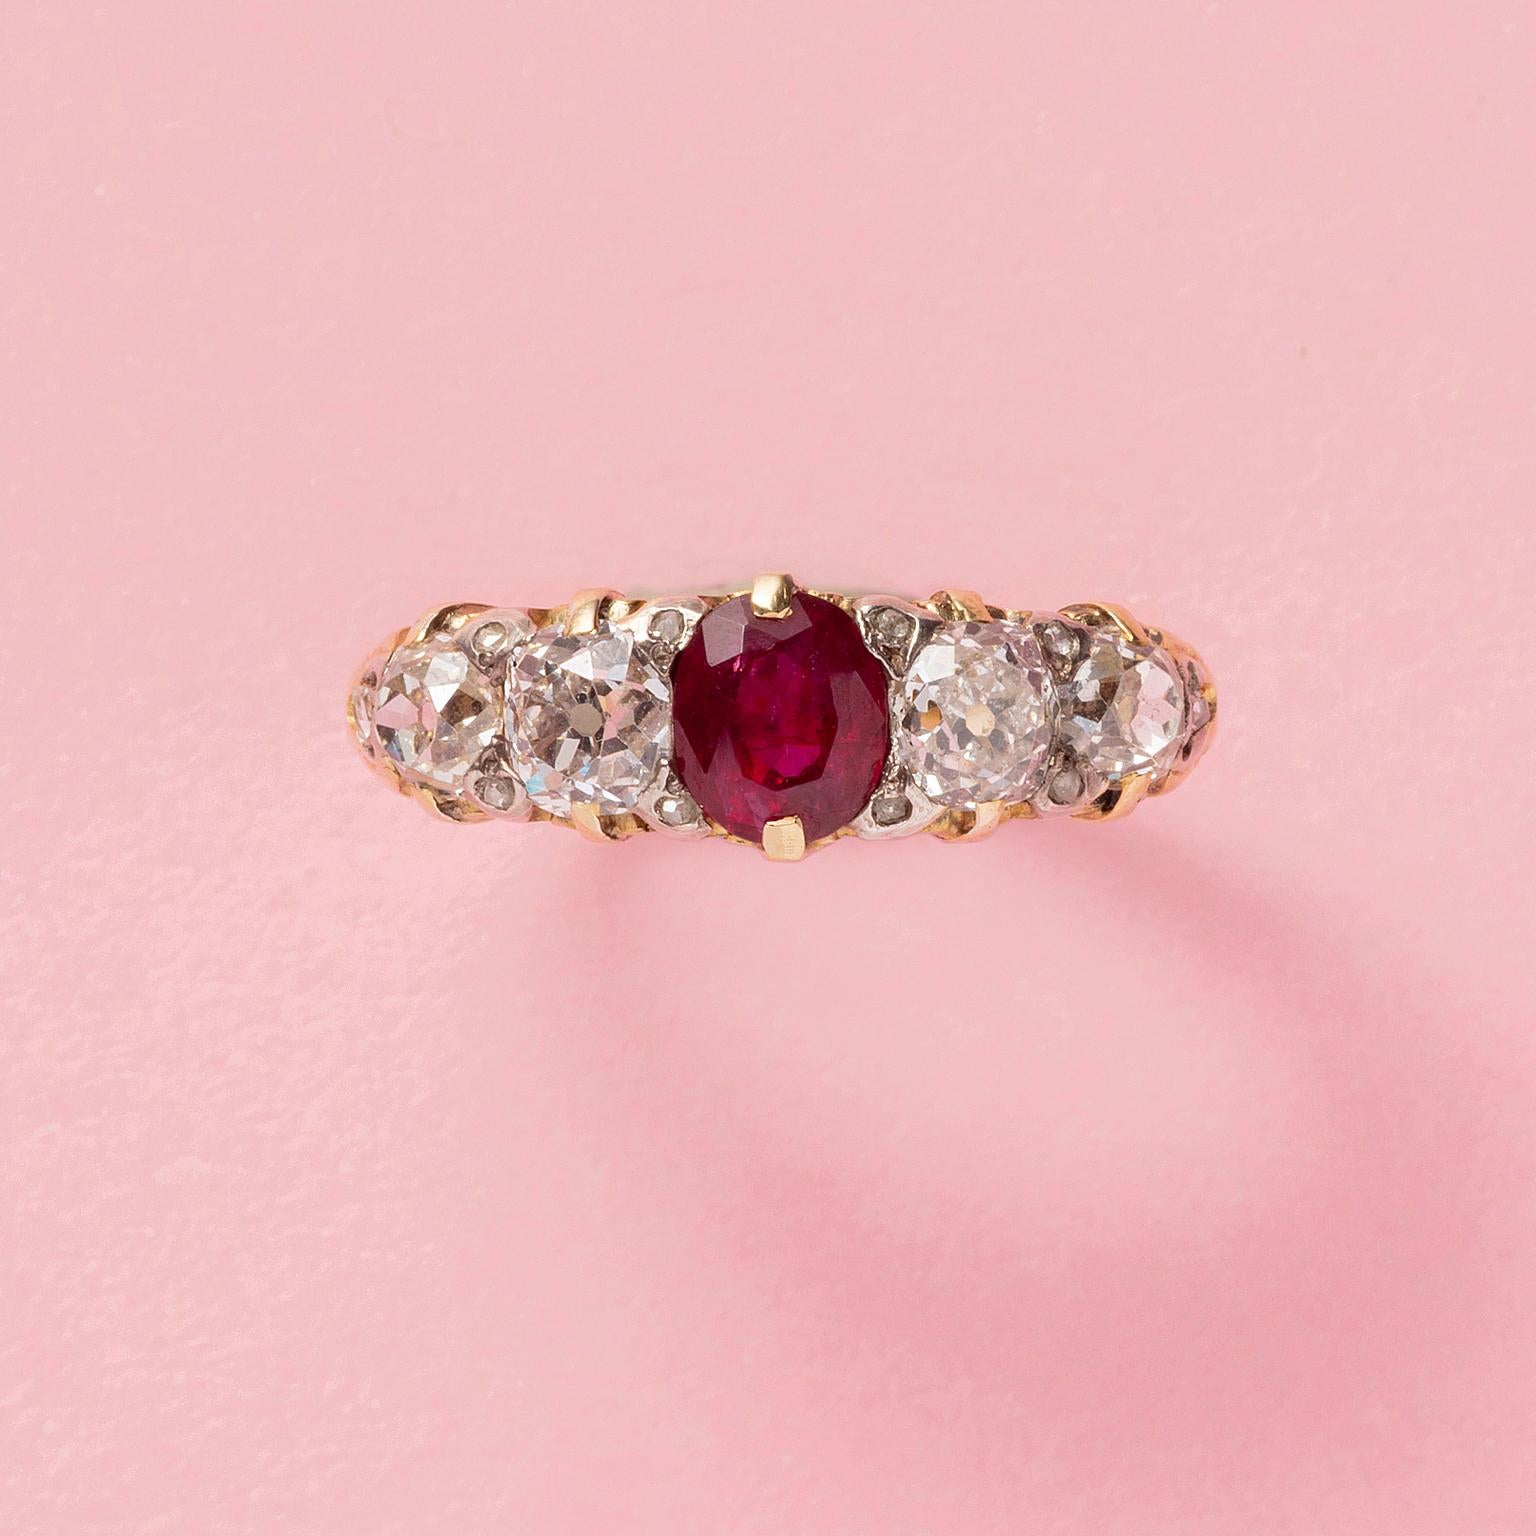 An 18 carat gold rowring set with an oval cut ruby (app. 0.95 ct) with on both sides two cushion cut diamonds and 10 small rose cut diamonds (app. 1.54 ct in total), England, circa 1890.

weigth: 4.42 grams
ring size: 16.5 mm / 6 US
width: 1.2 – 7